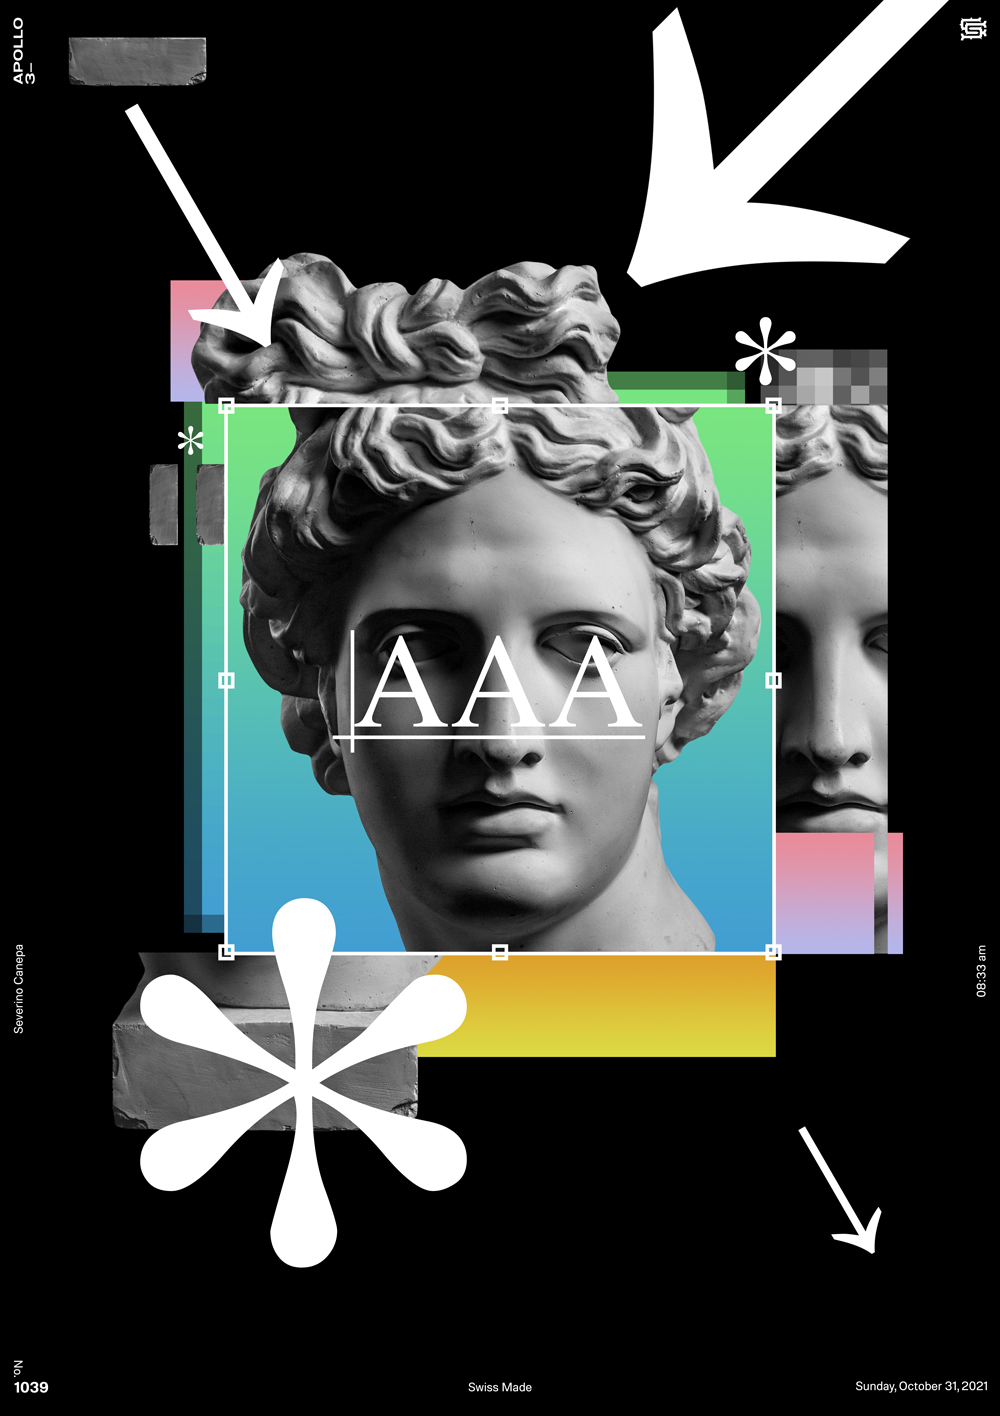 Geometric digital creation I realized with Apollo's Statue, Typography, and Glyphs symbols